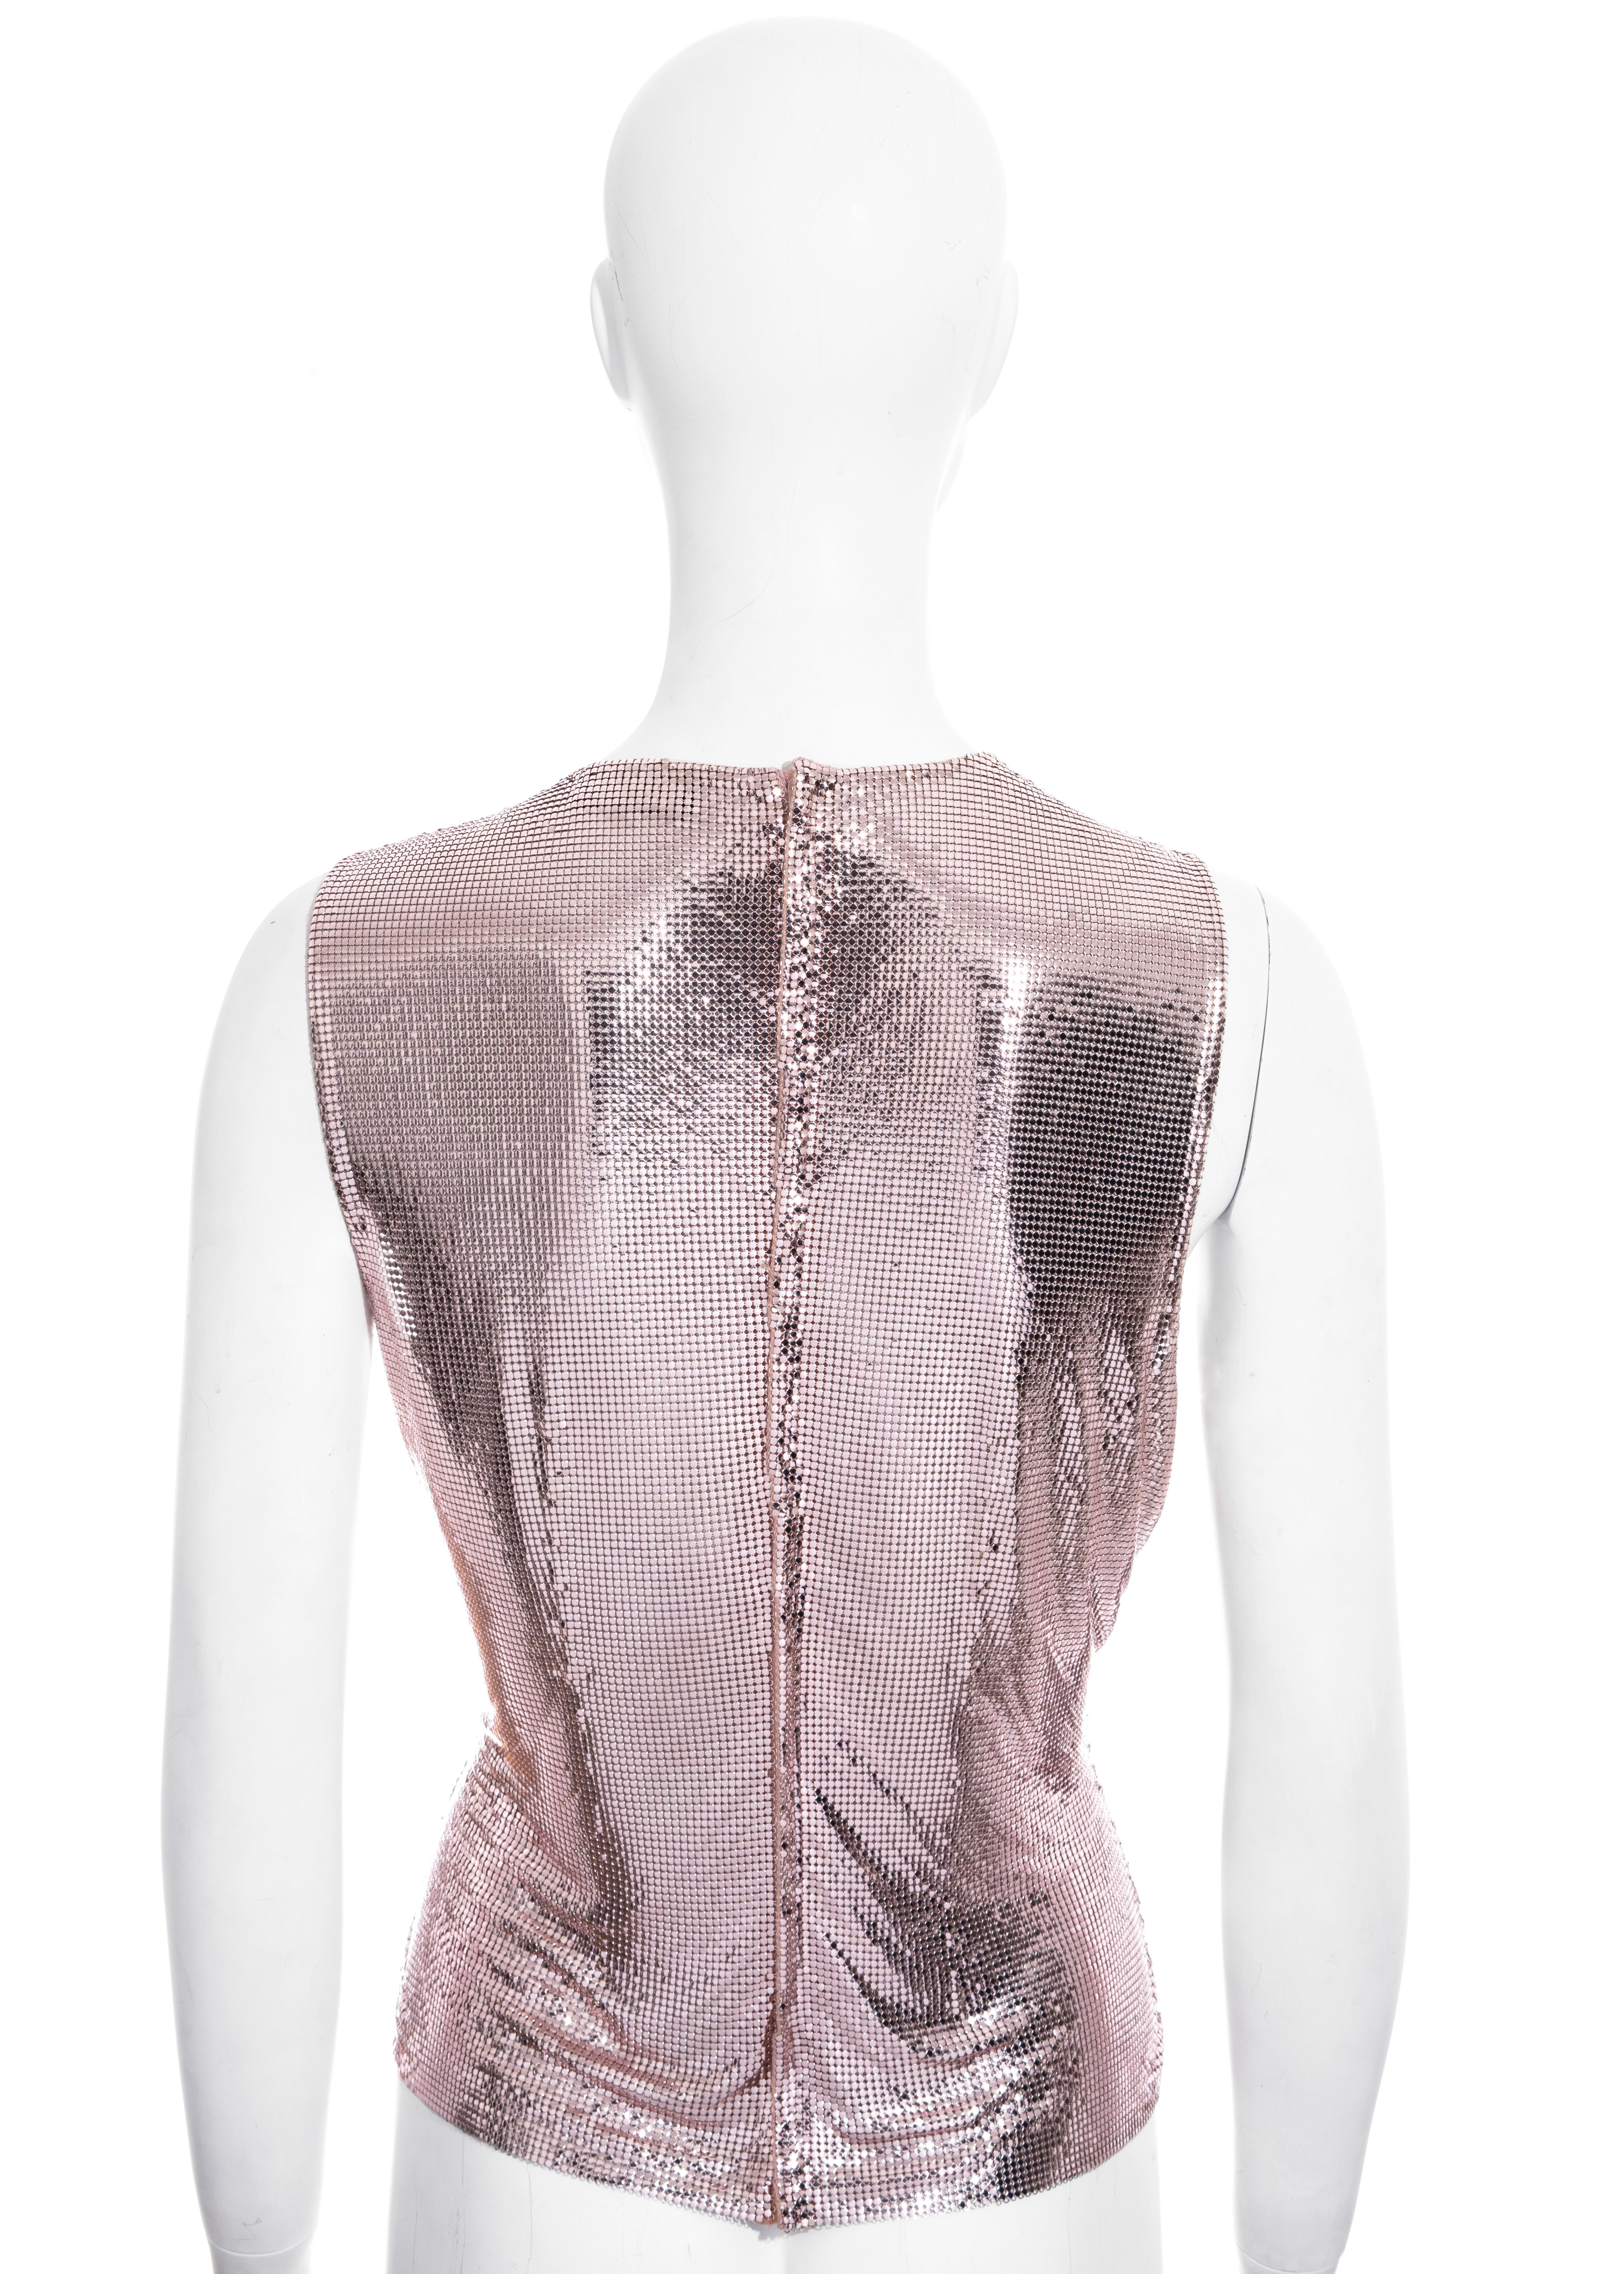 Gray Gianni Versace rose gold Oroton metal mesh vest, fw 1994 For Sale